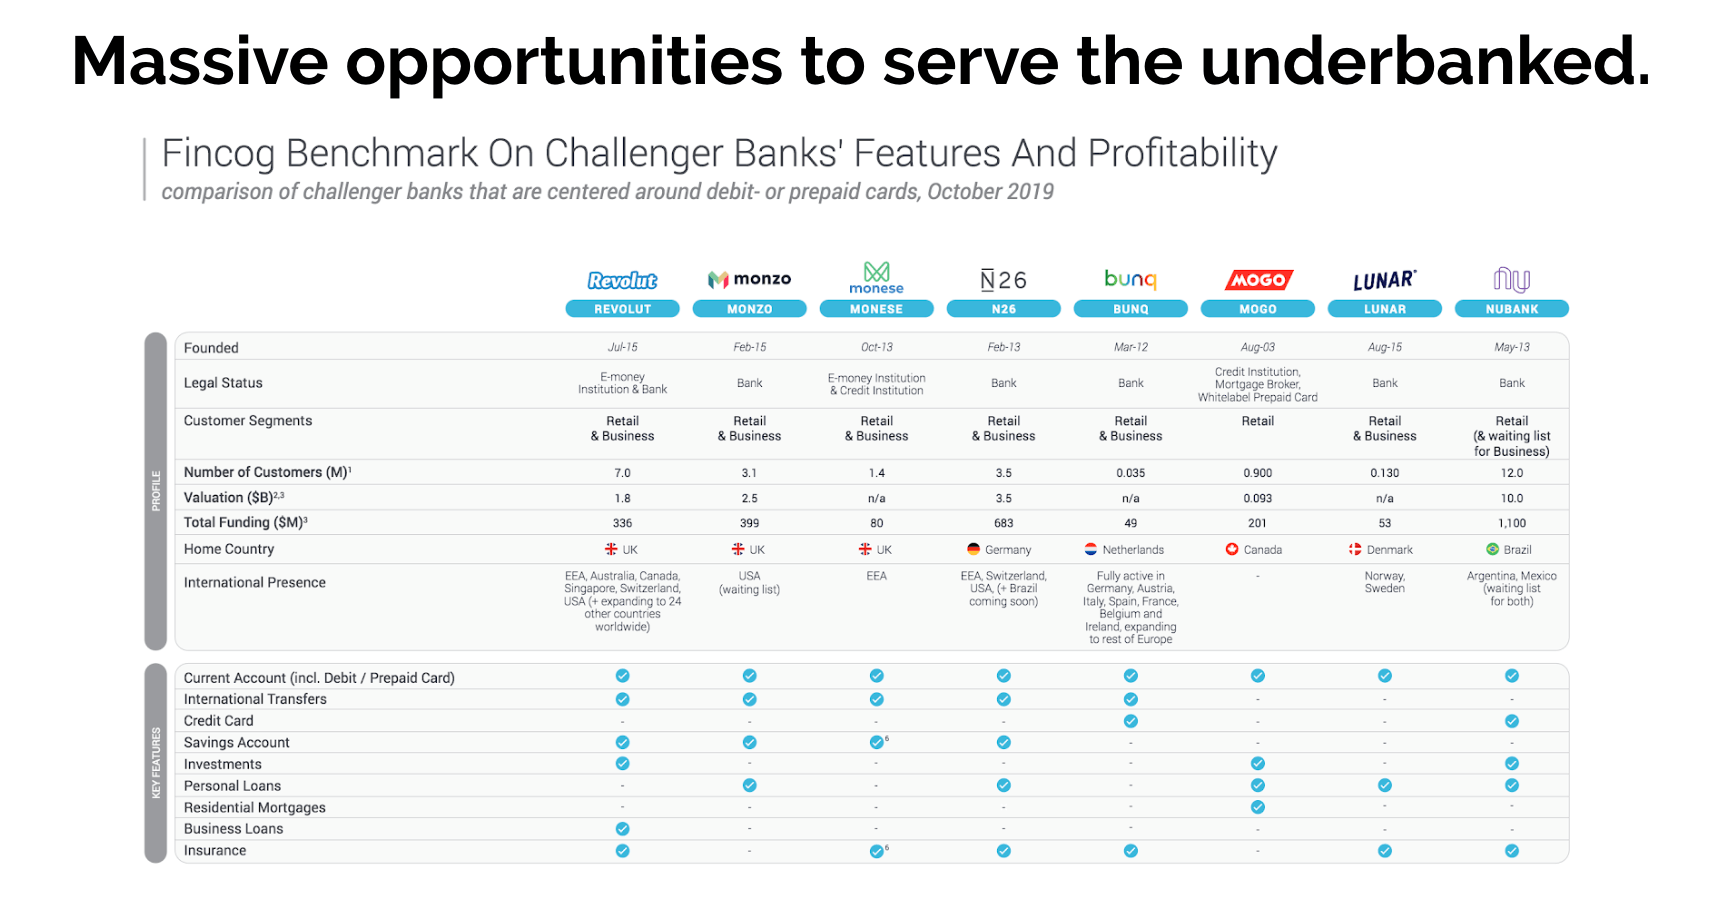 Massive opportunities to serve the underbanked.